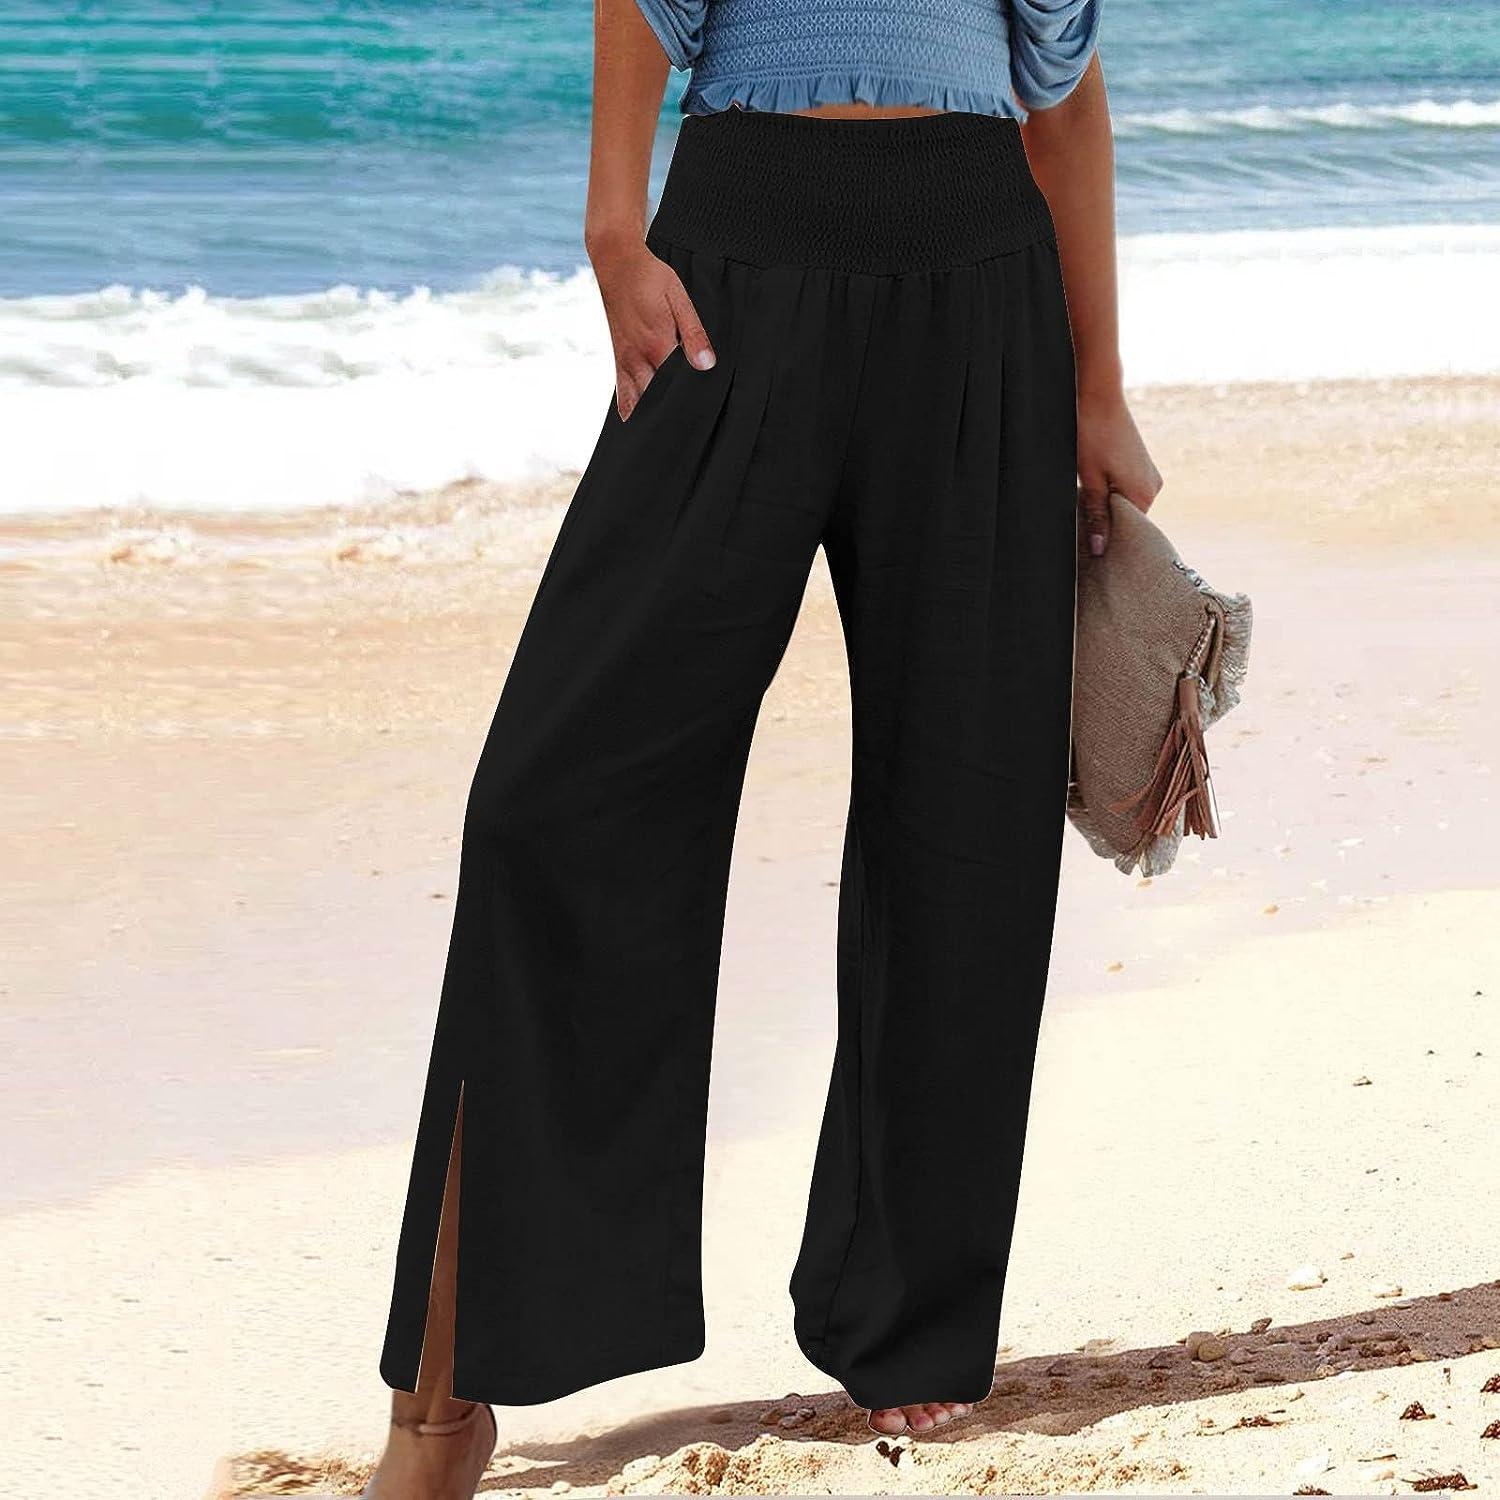 Five different ways to style a palazzo pants – Everyday fashion